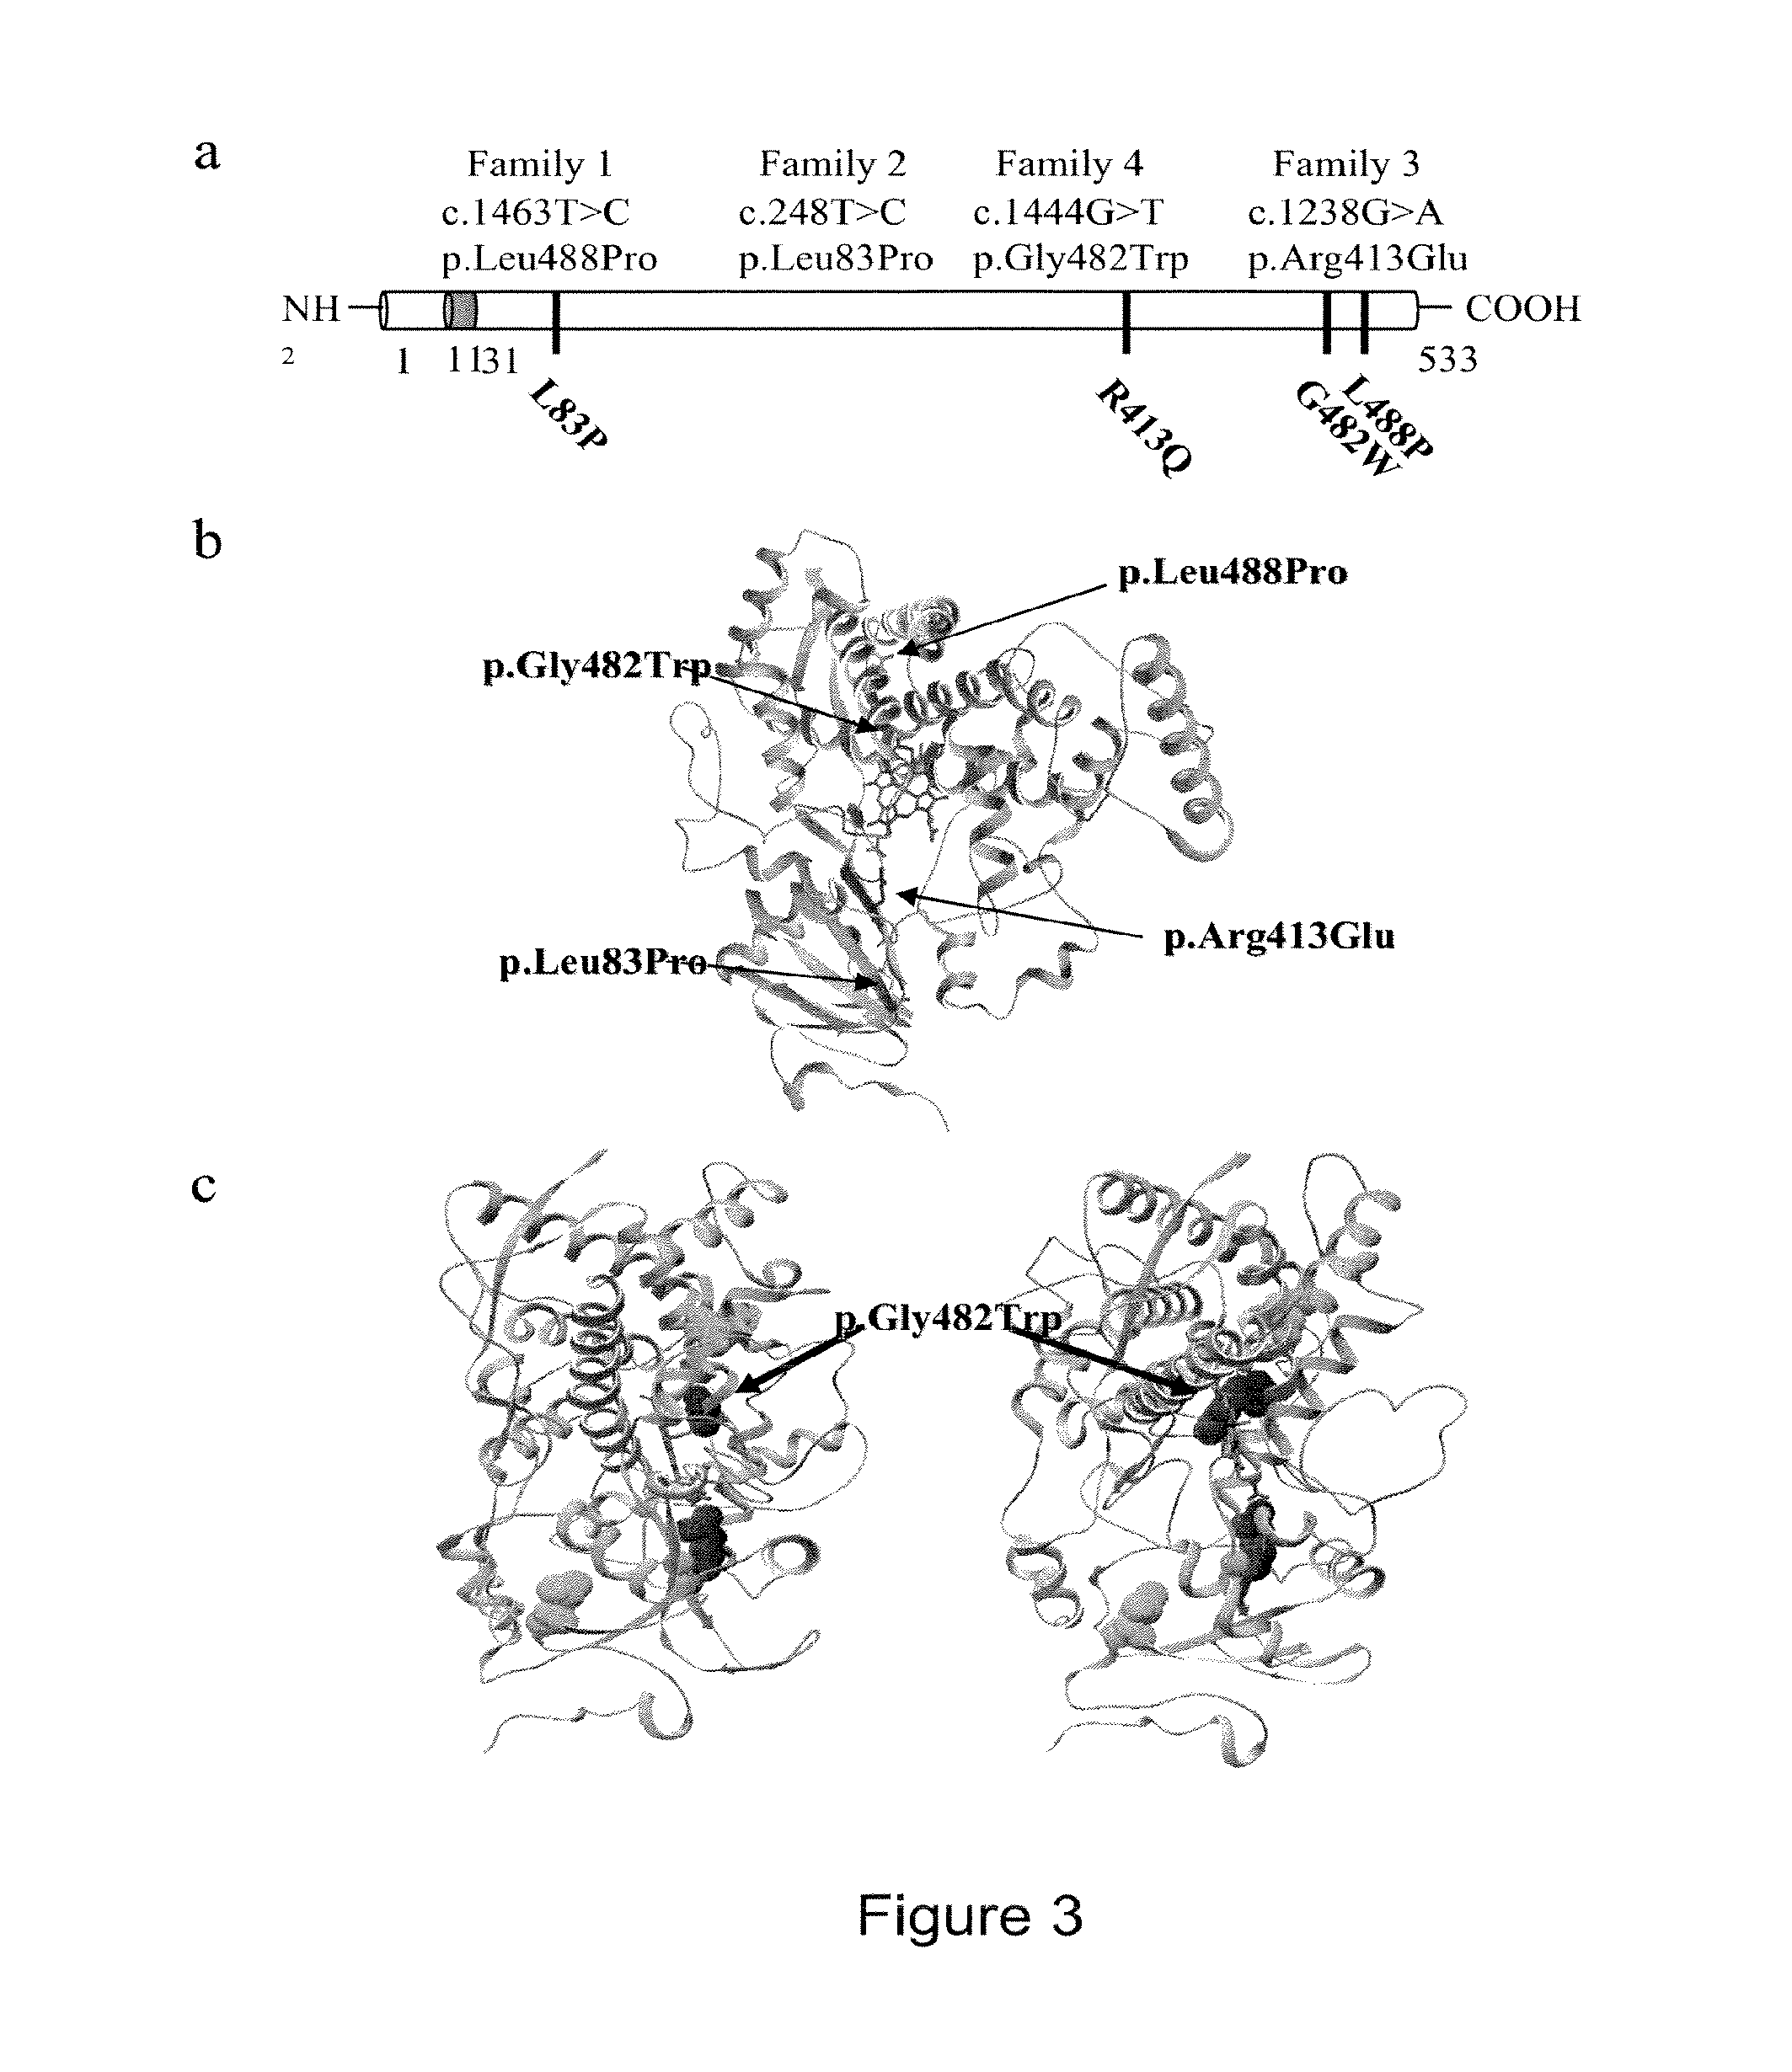 Methods for the treatment and diagnosis of bone mineral density related diseases